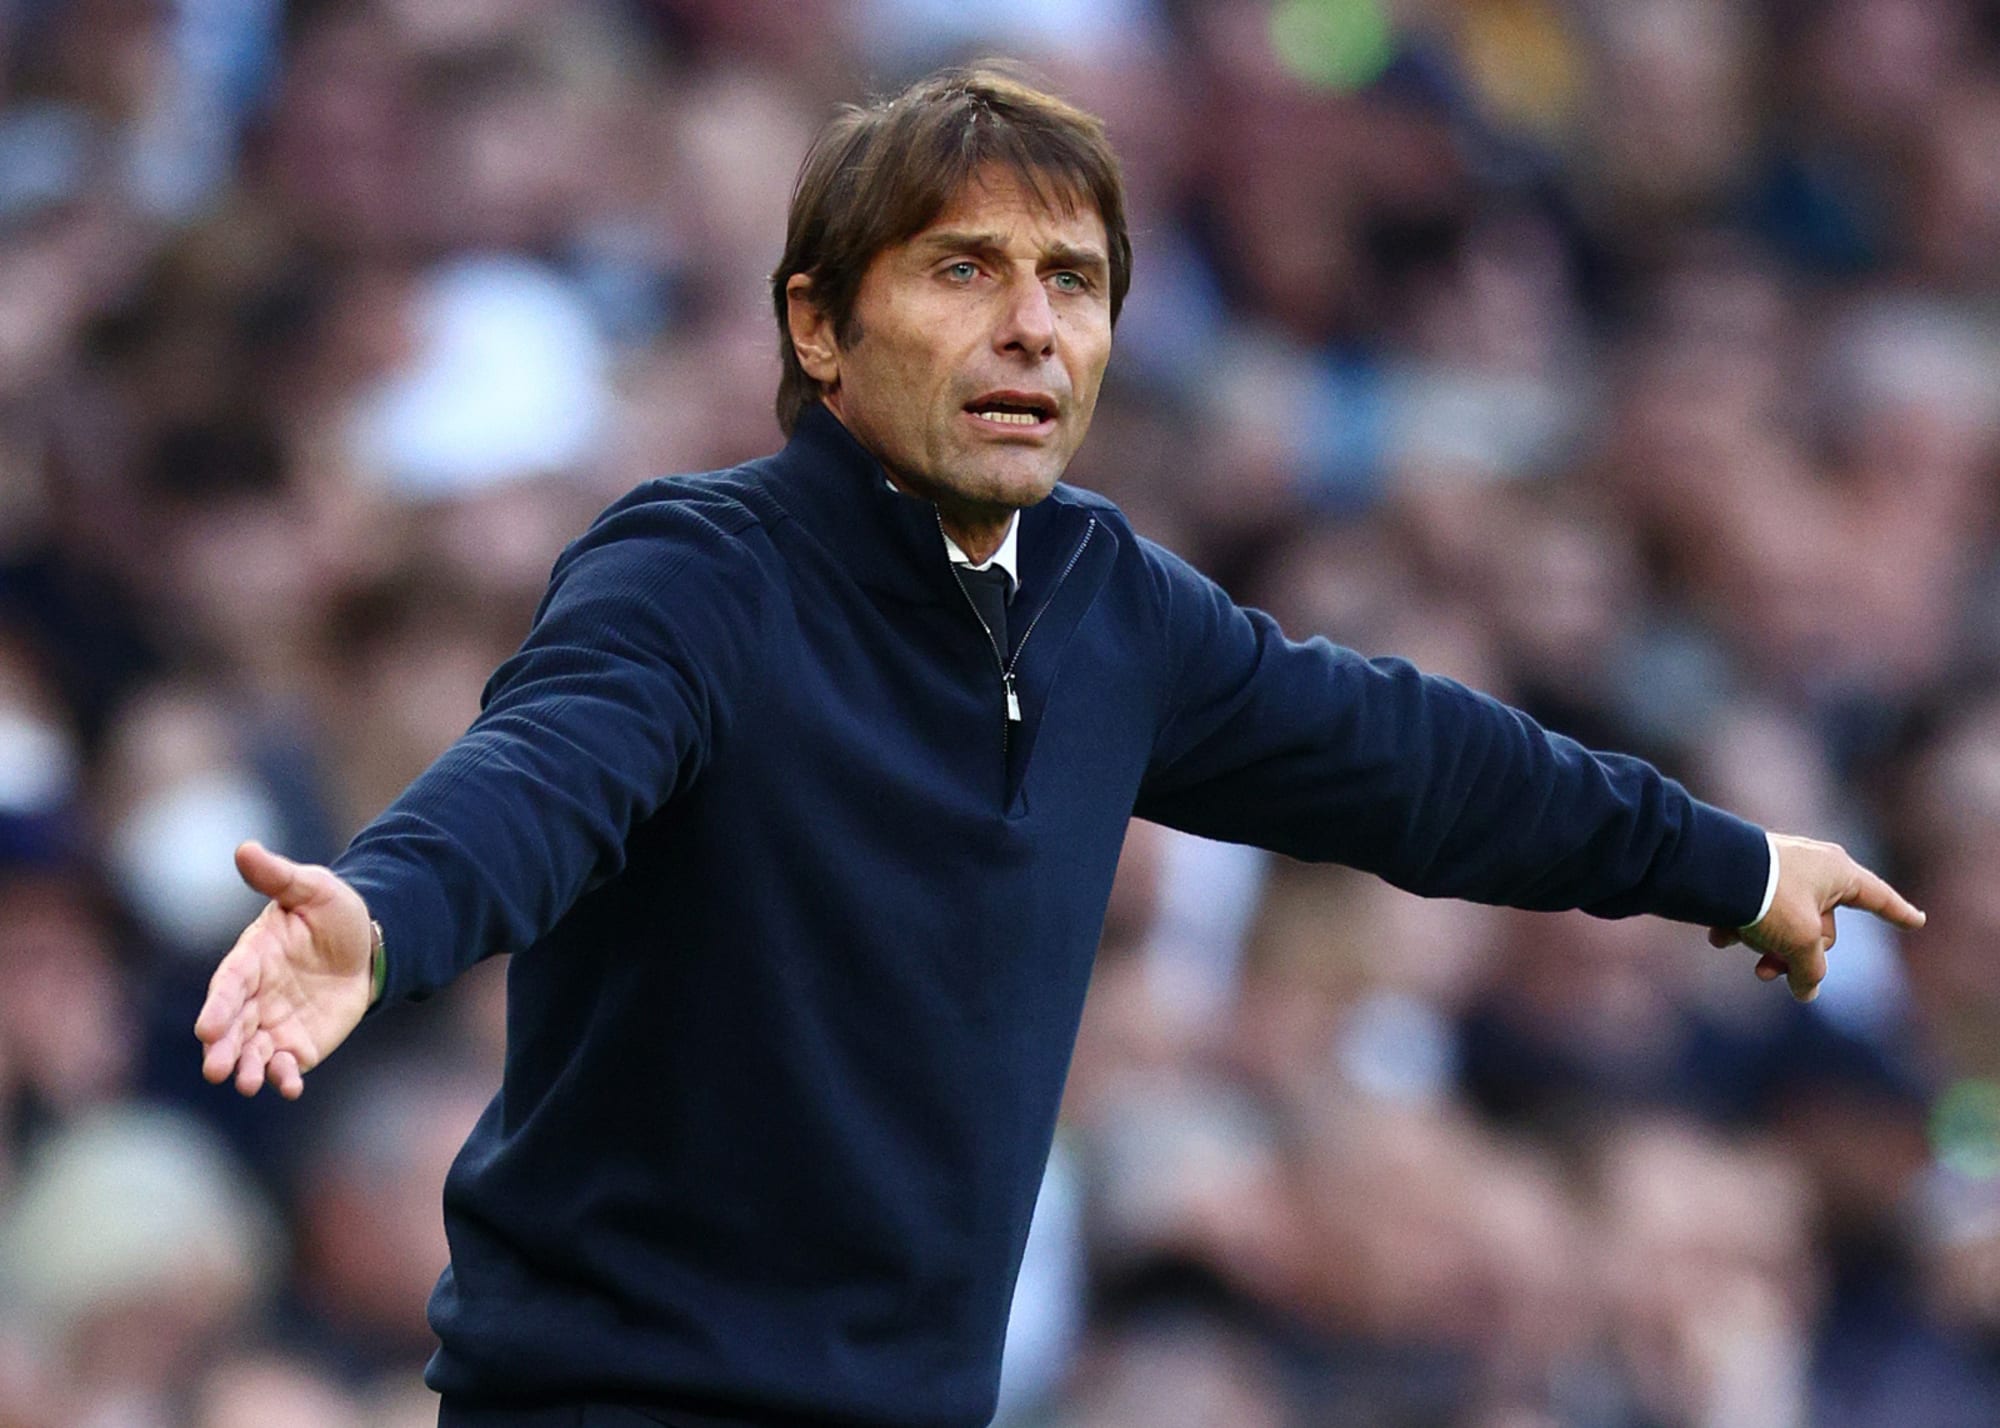 Win marks end of a full Premier League season for Conte at Tottenham